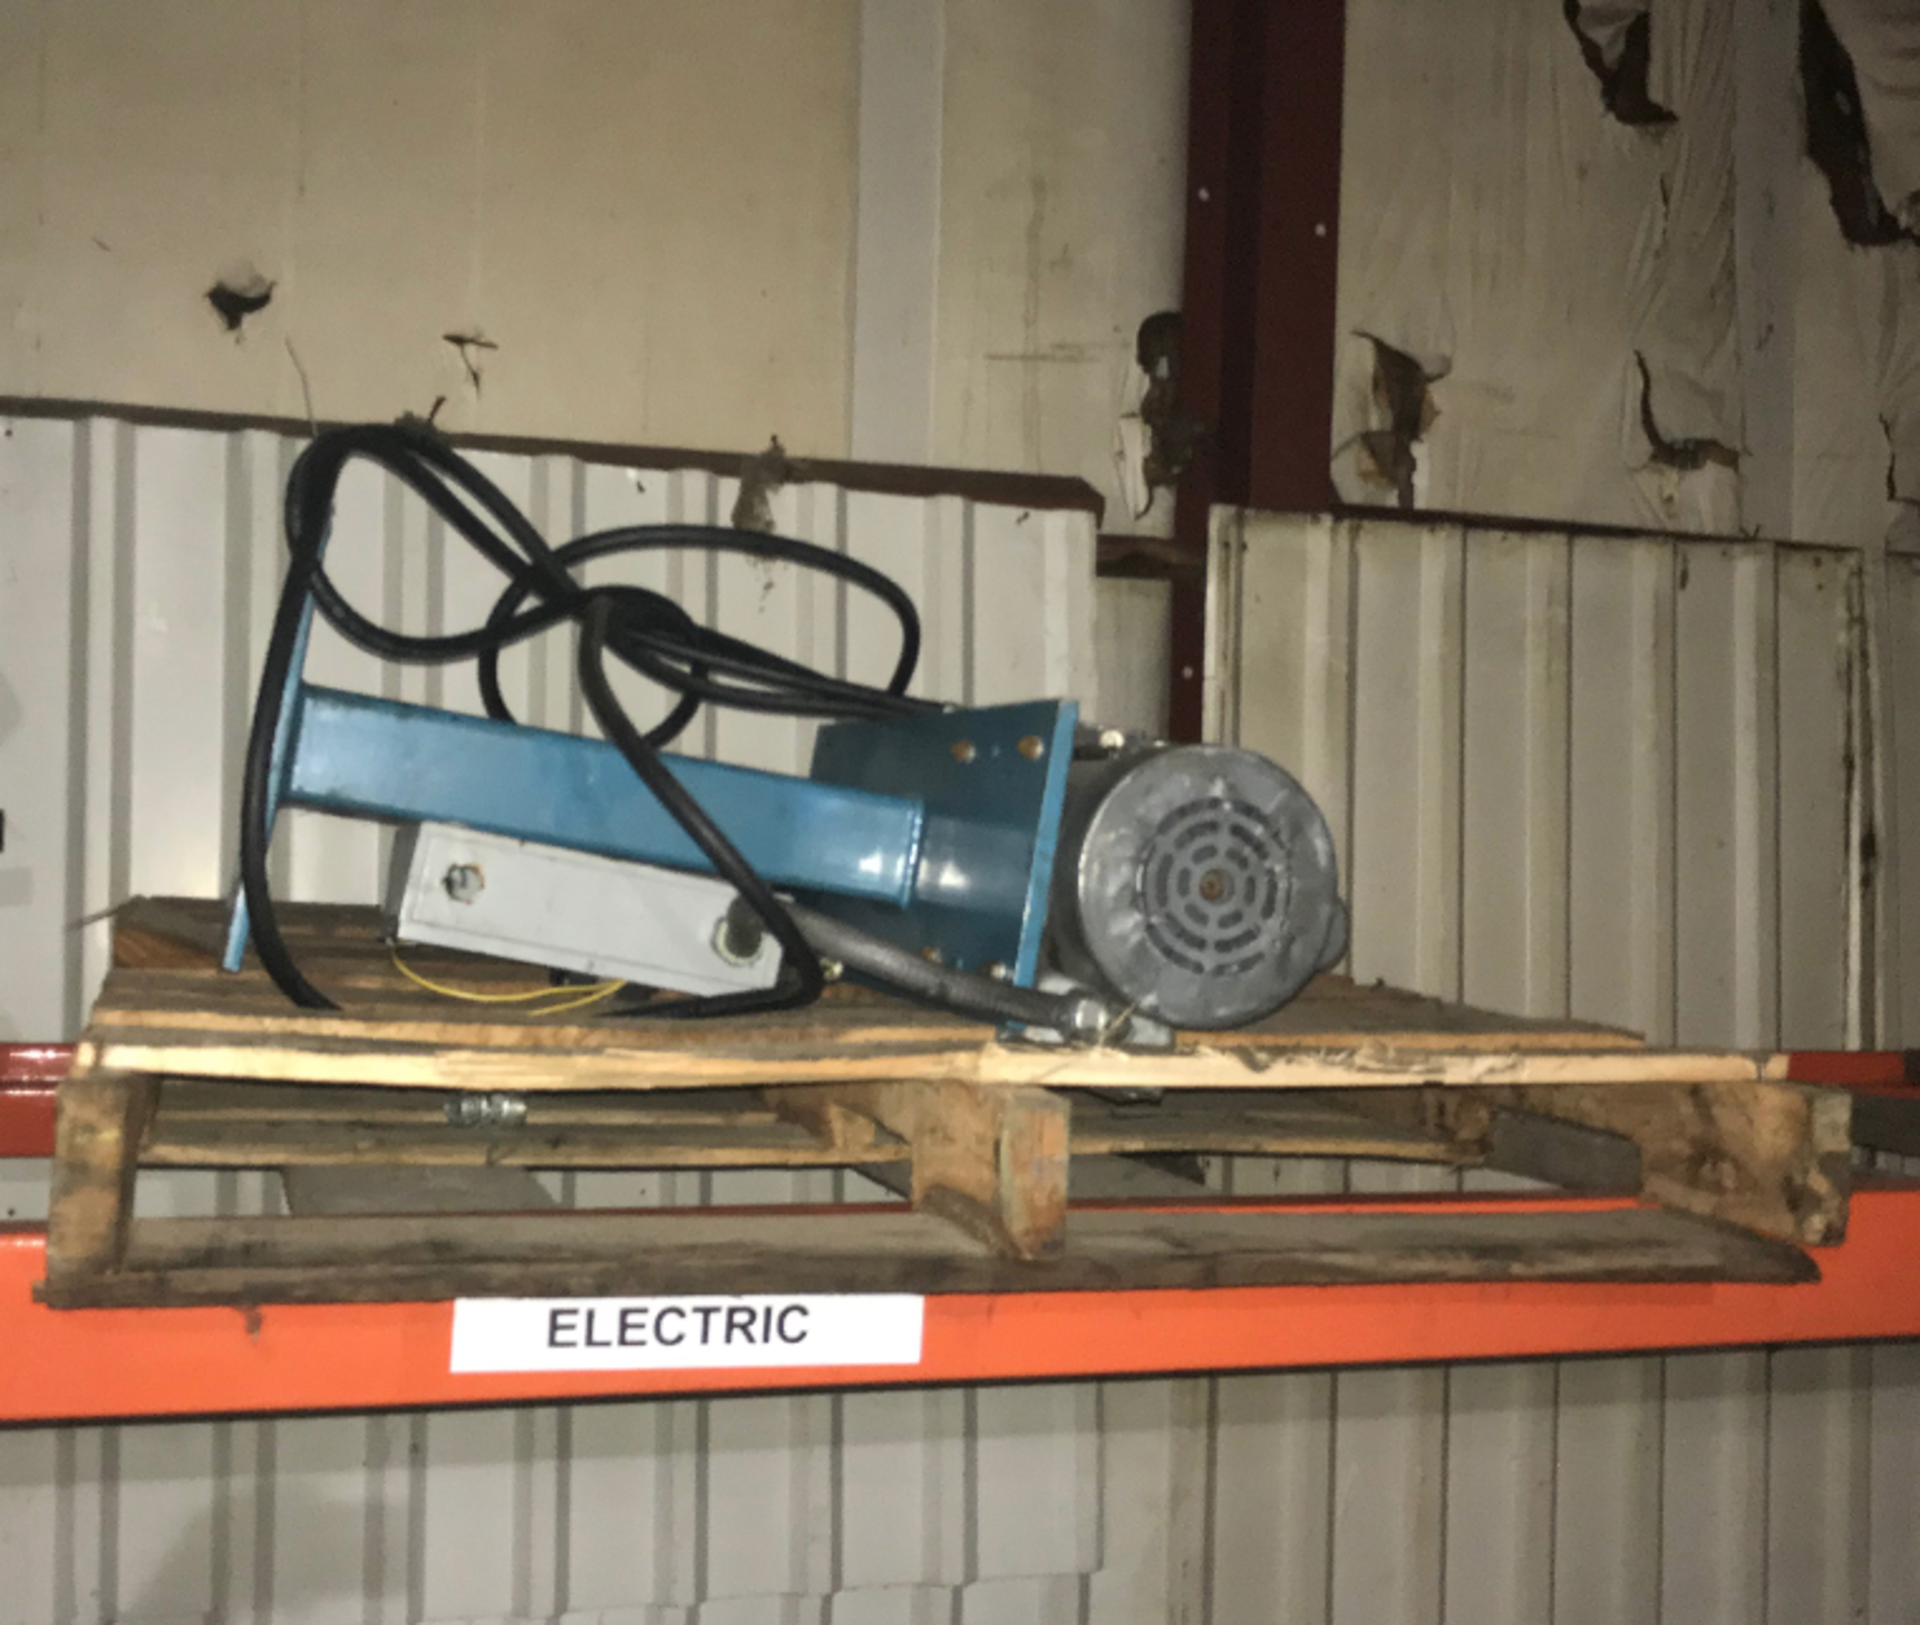 Dayton AC Hydraulic Power Pack, Model 4Z474, 2 GPM, Rigging Fee For This Item Is $30 - Image 2 of 5